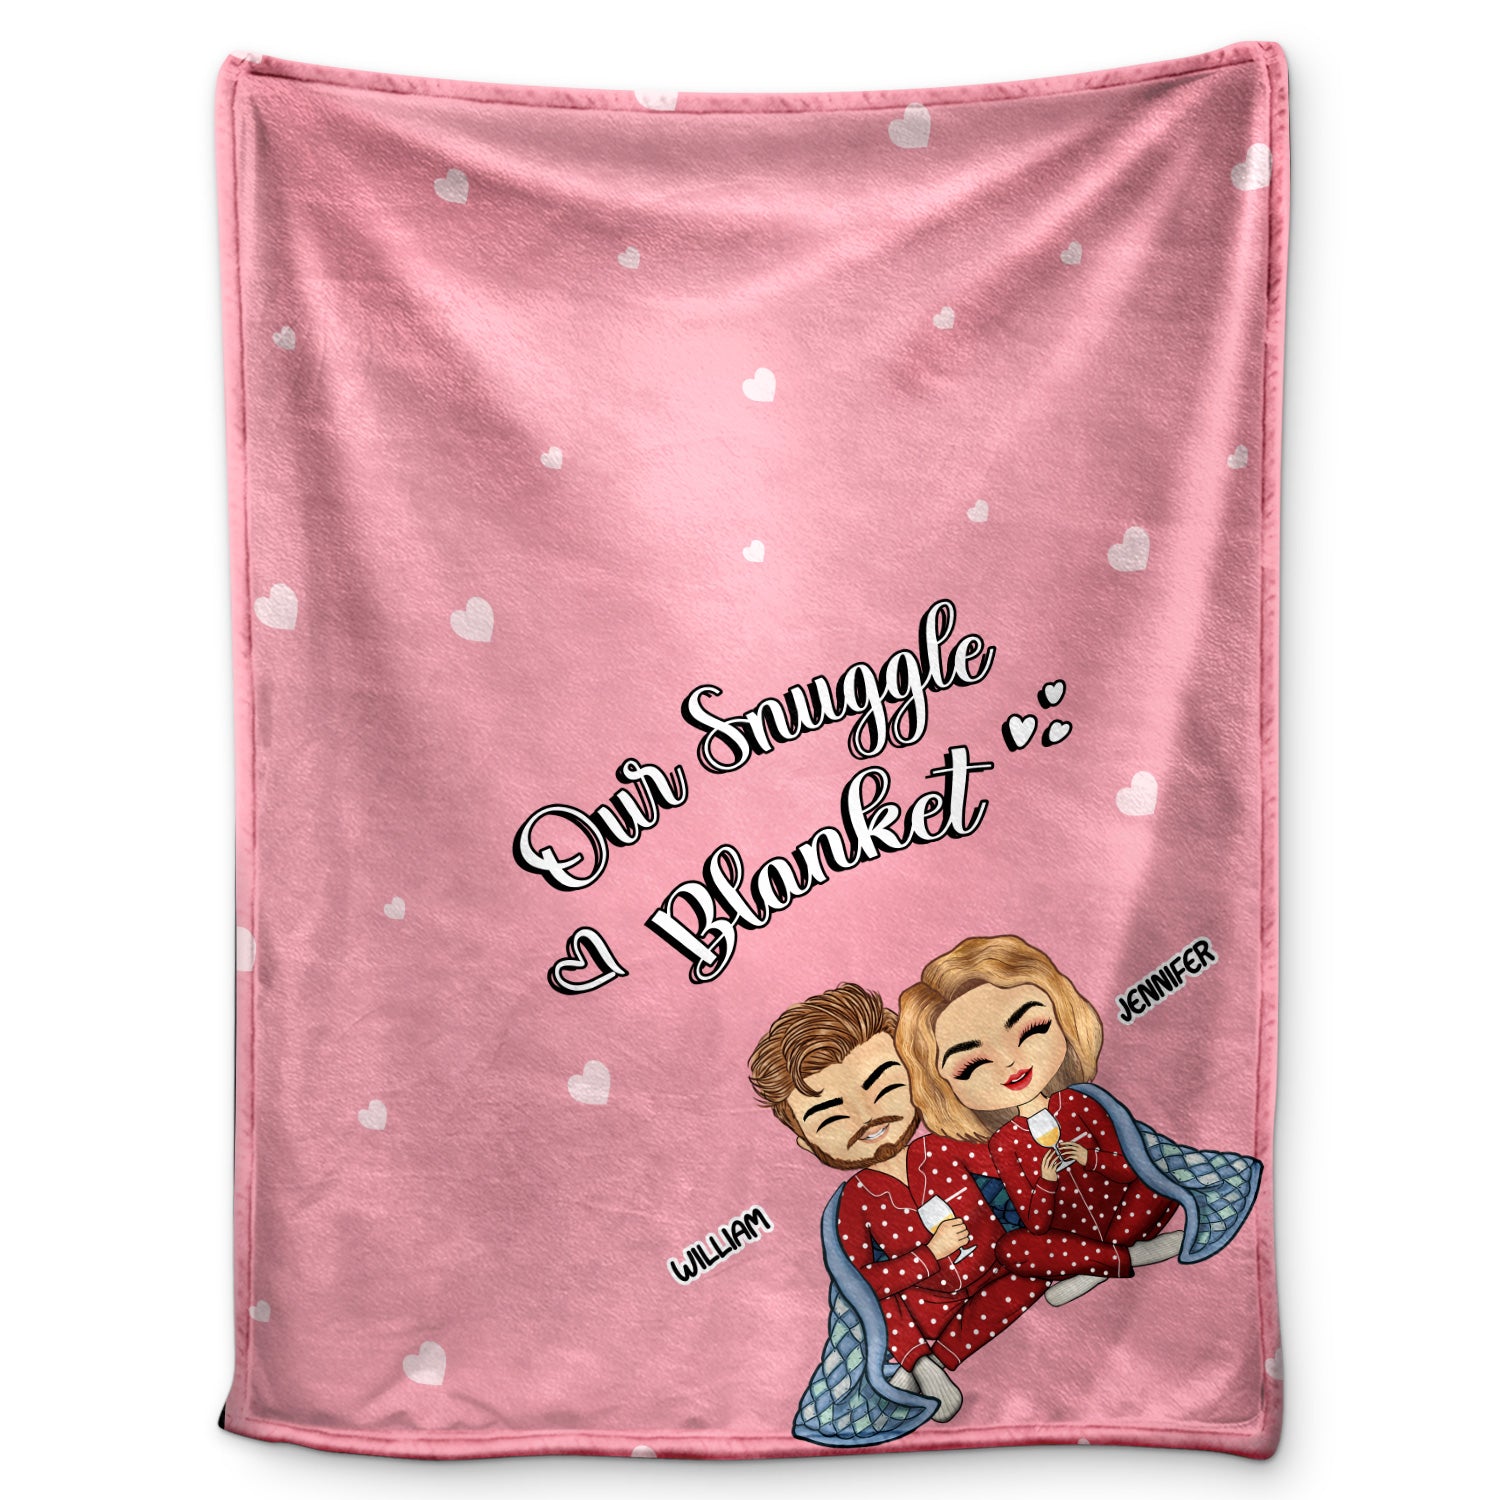 Couple Sitting Our Snuggle Blanket - Gift For Couples - Personalized Custom Fleece Blanket